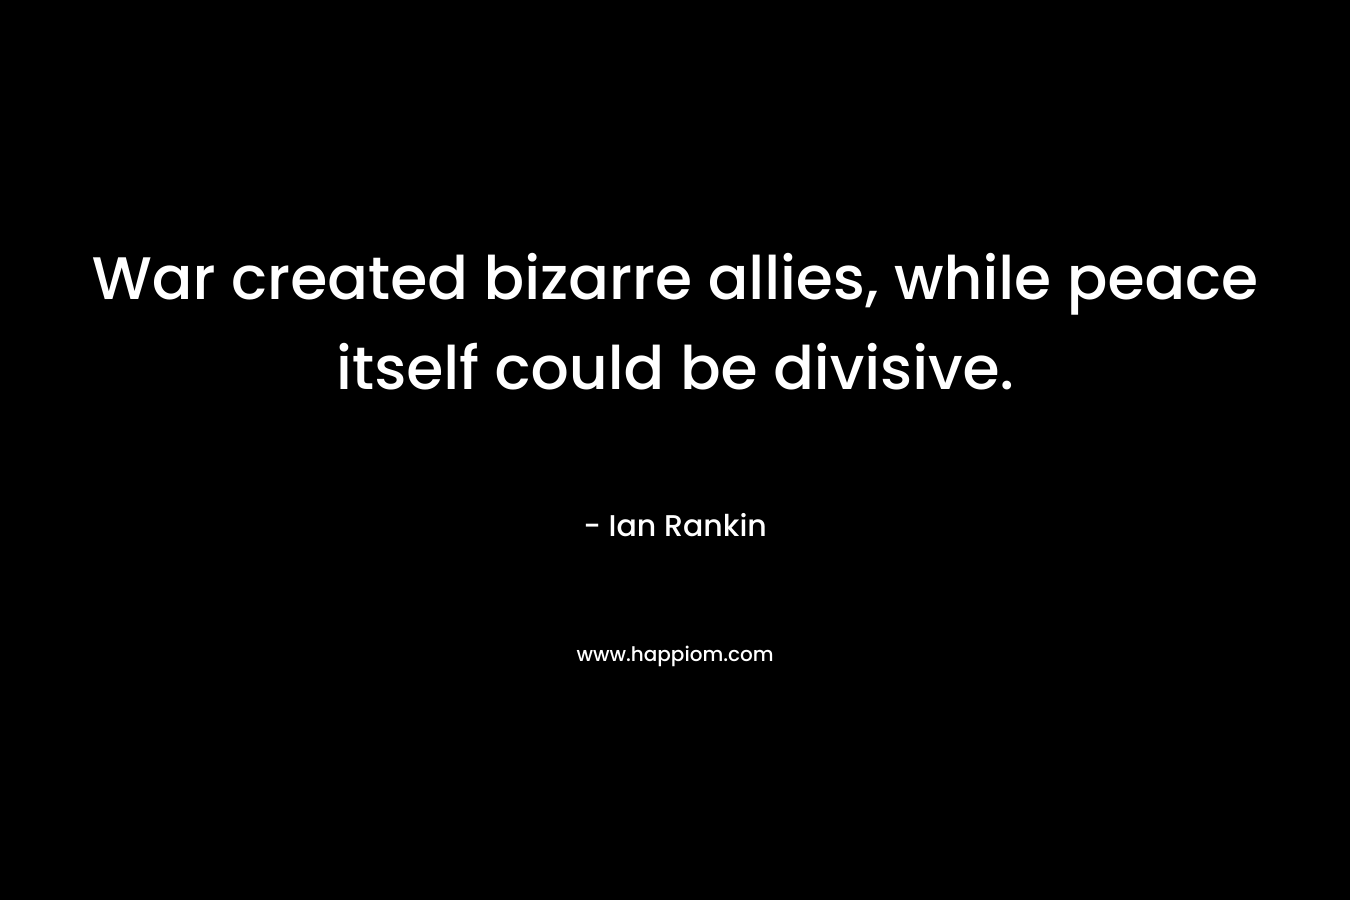 War created bizarre allies, while peace itself could be divisive. – Ian Rankin